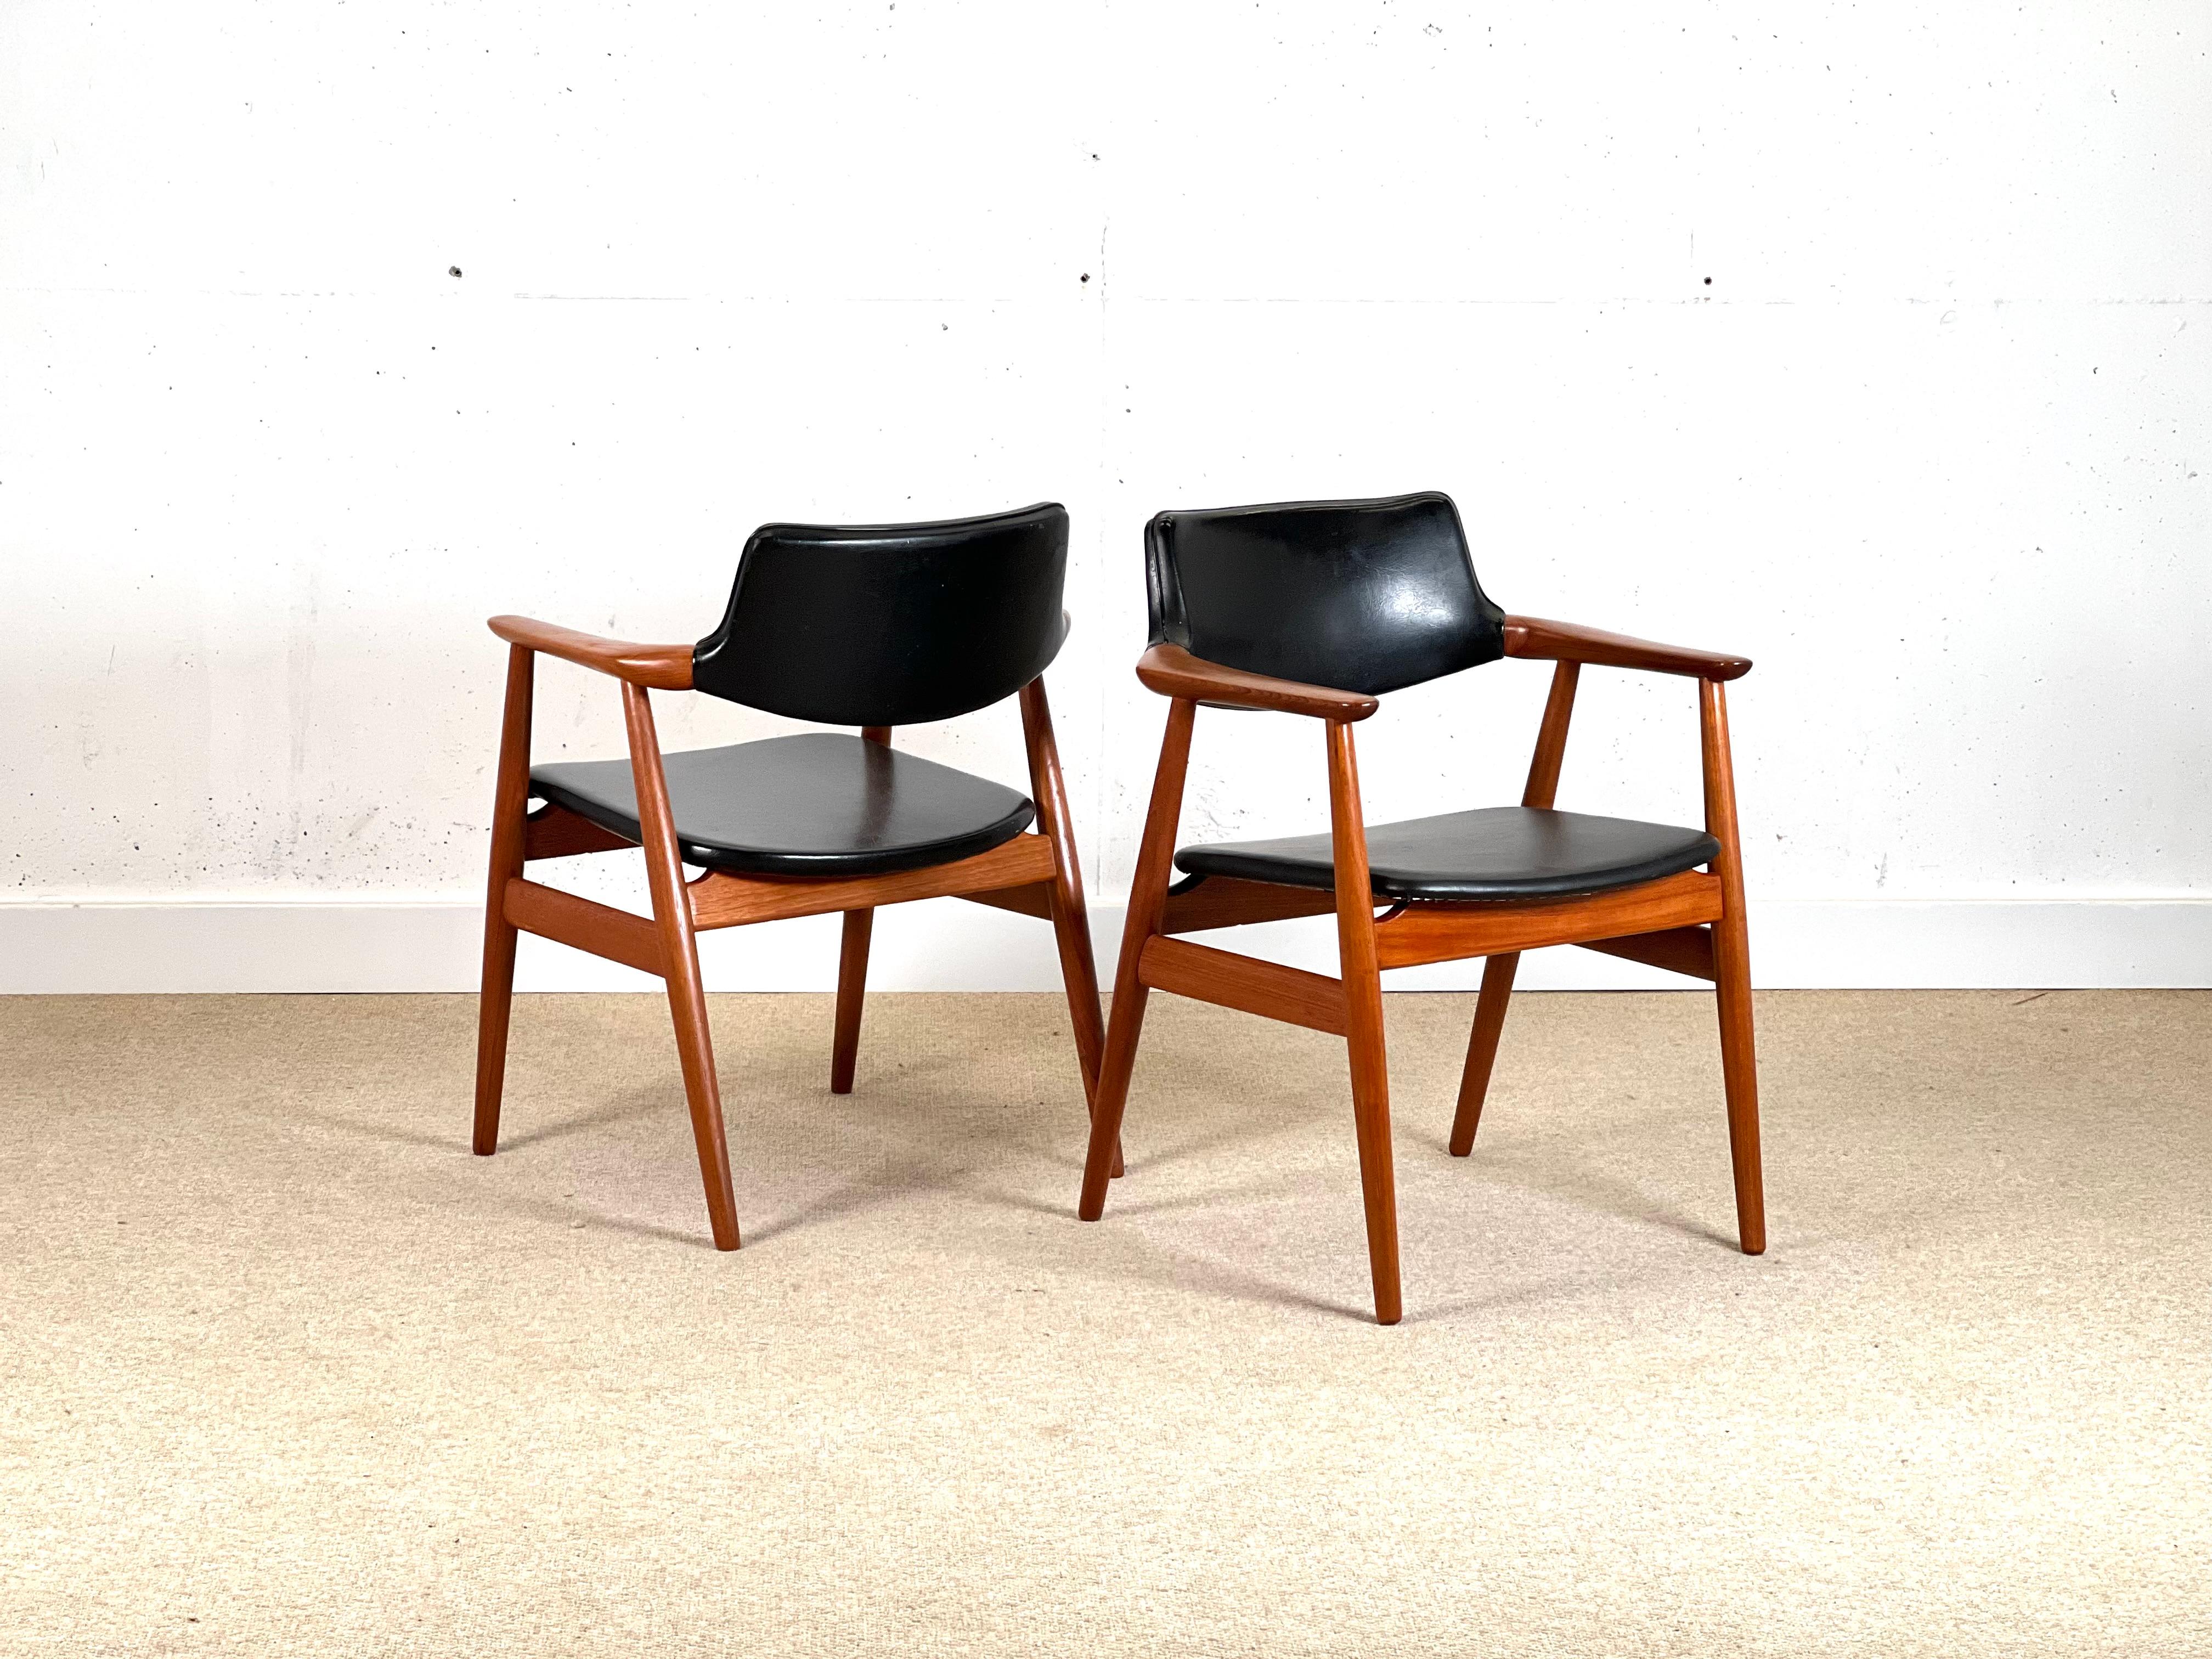 A Set Of Four or six Svend Aage Eriksen Dining Room Chair Model Gm11, 1960 For Sale 1